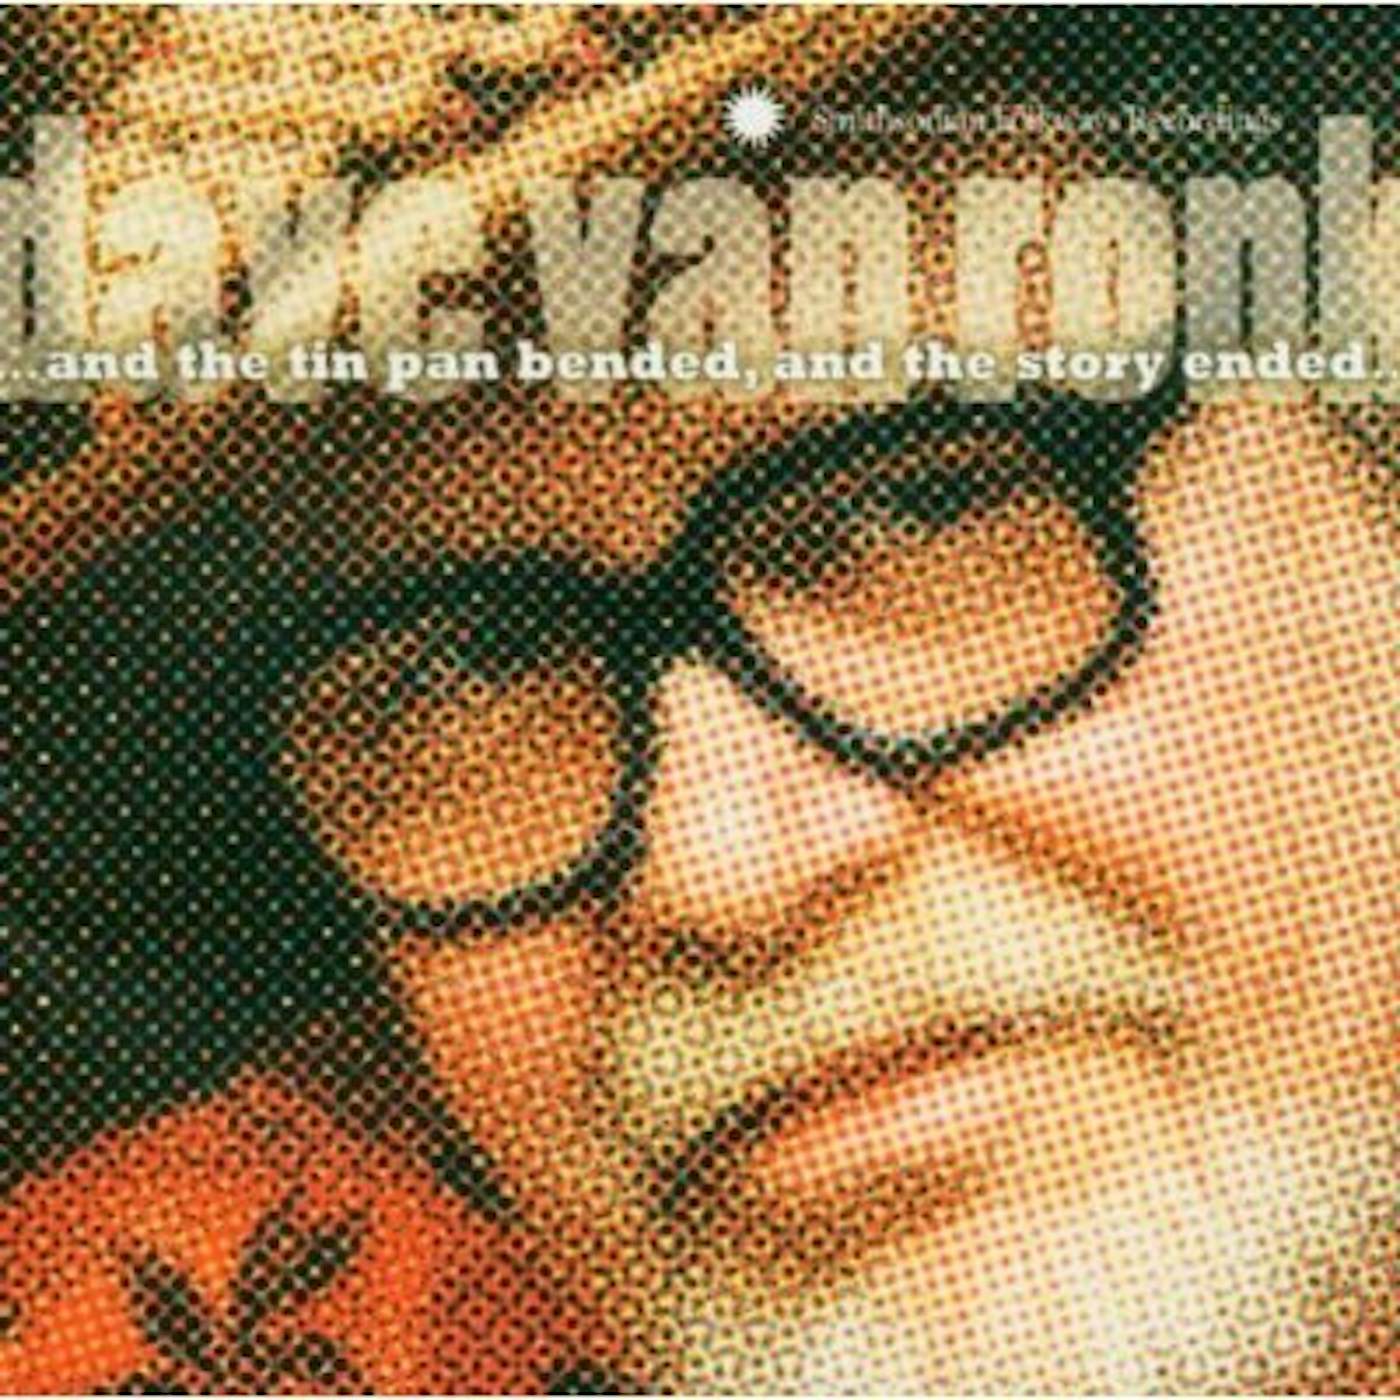 Dave Van Ronk & THE TIN PAN BENDED & THE STORY ENDED CD